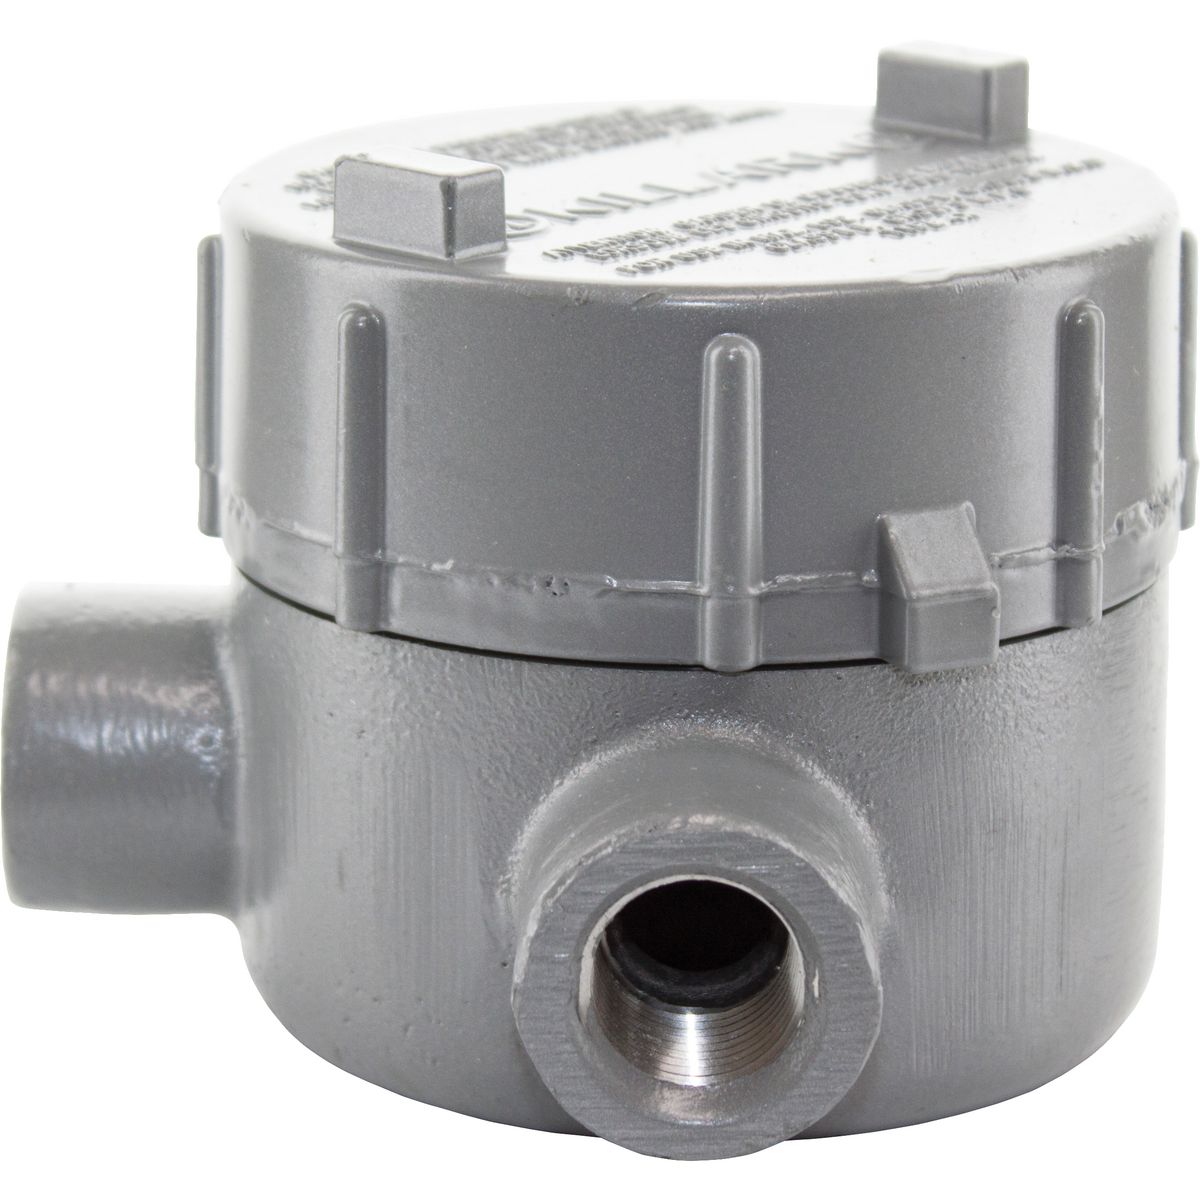 GEC SERIES FITTINGS - IRON - L TYPE OUTLET BODY - HUB SIZE 1/2 IN -VOLUME 18.0 CU IN